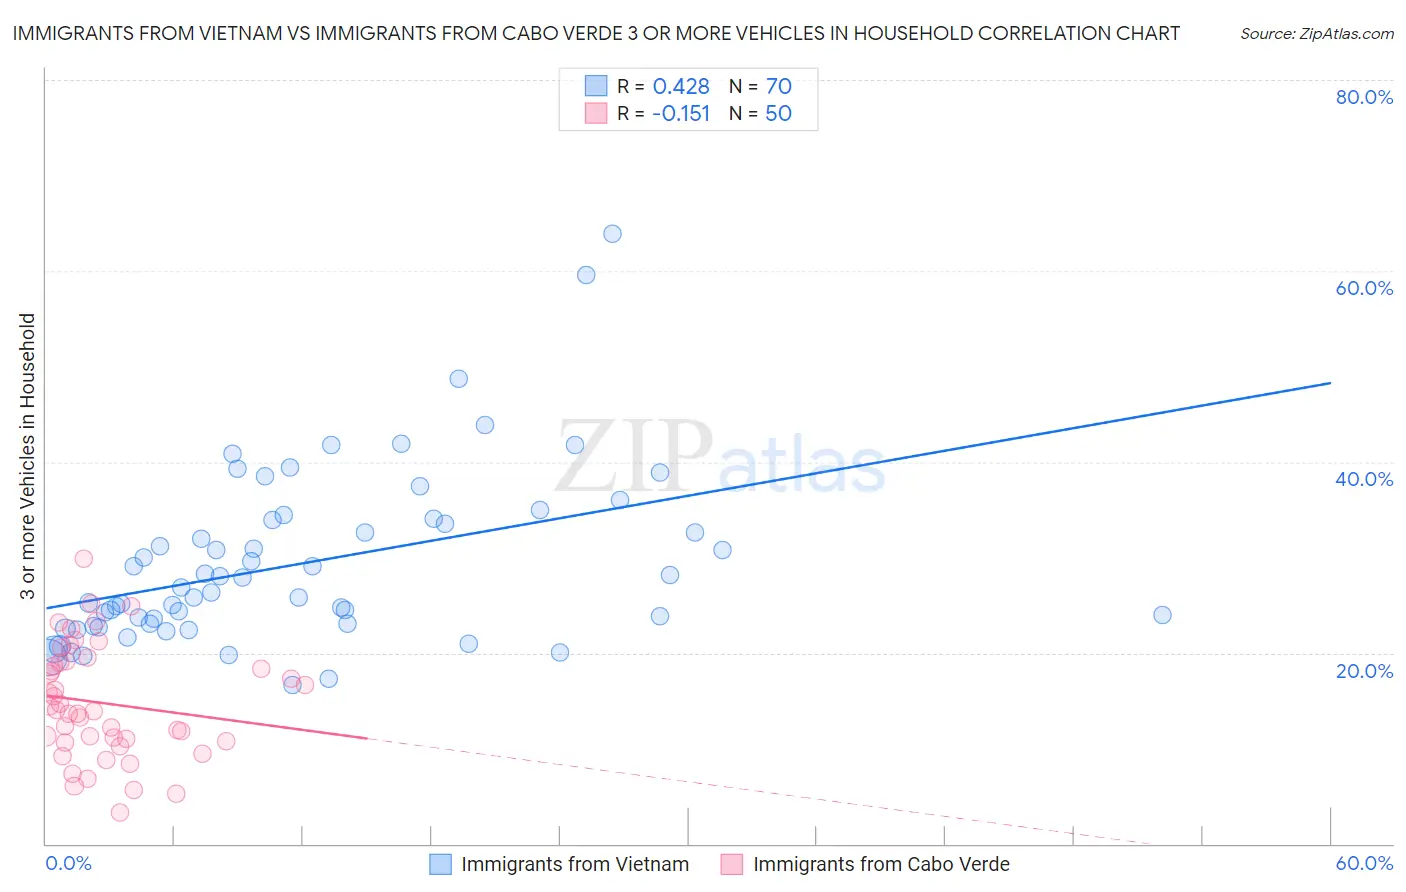 Immigrants from Vietnam vs Immigrants from Cabo Verde 3 or more Vehicles in Household